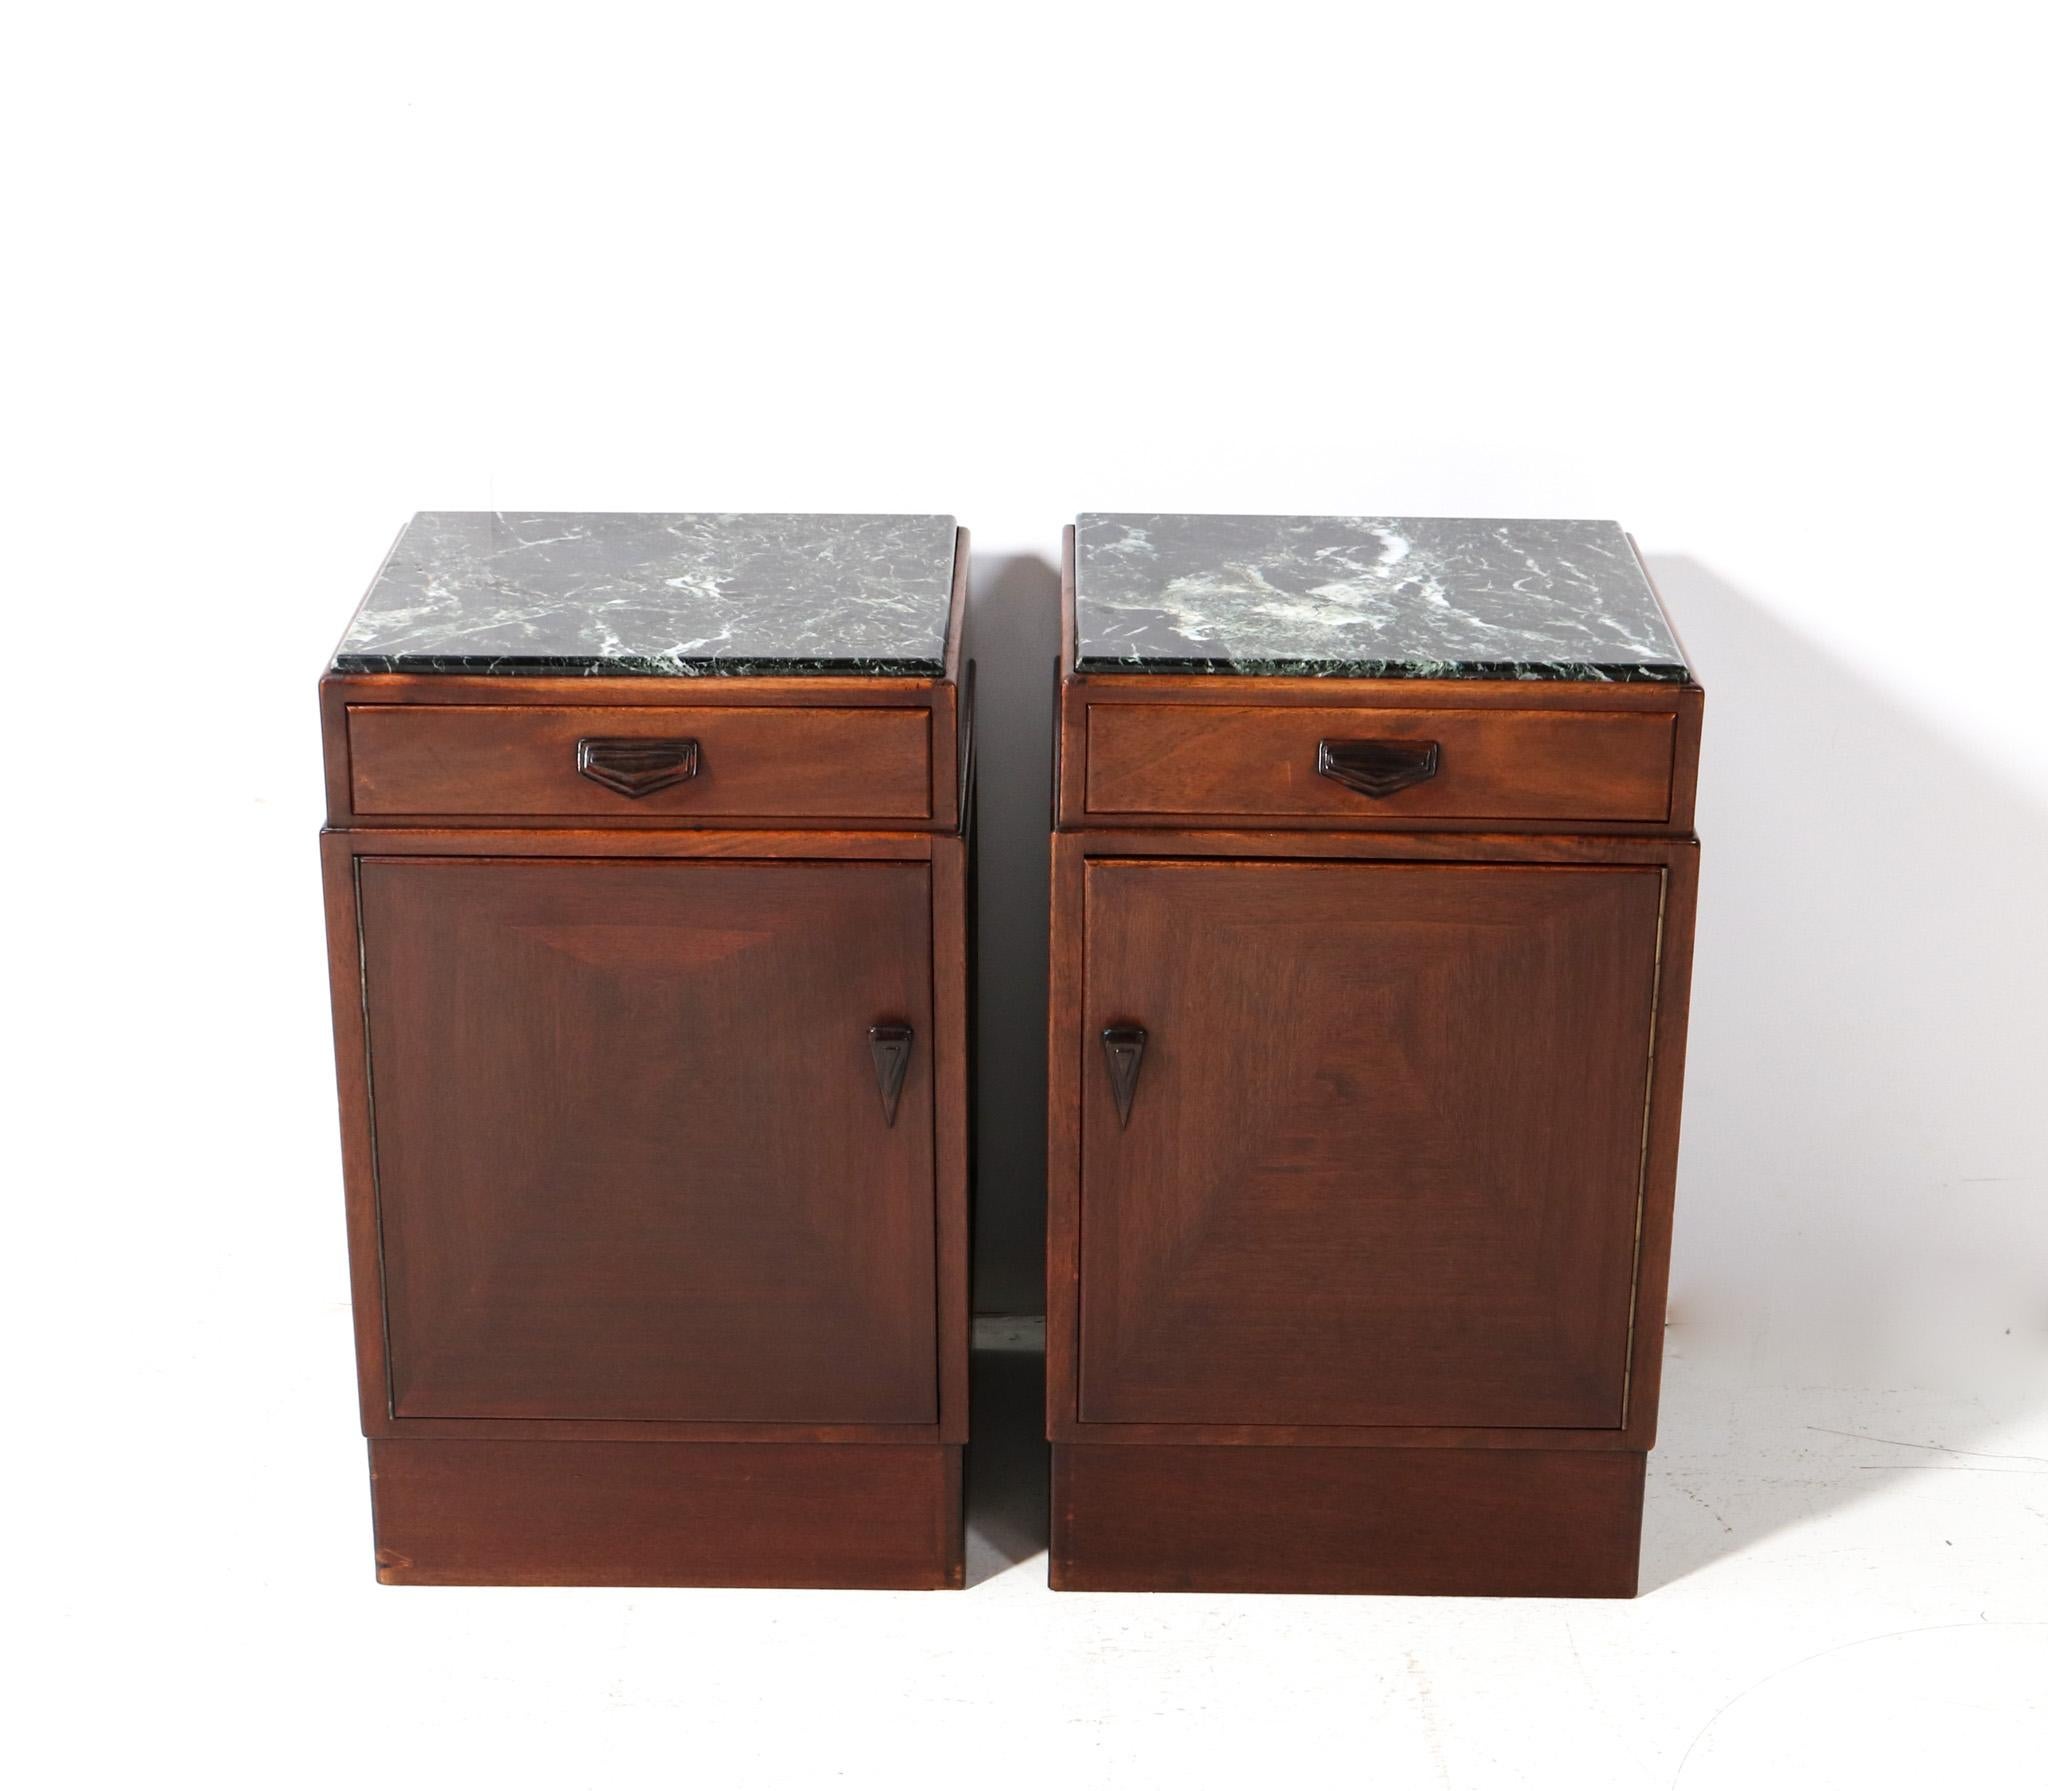 Stunning and rare pair of Art Deco Amsterdamse School bedside tables or nightstands.
Striking Dutch design from the 1920s.
Solid walnut and original walnut veneer with solid macassar ebony handles on both doors and drawers.
Original multi-colored